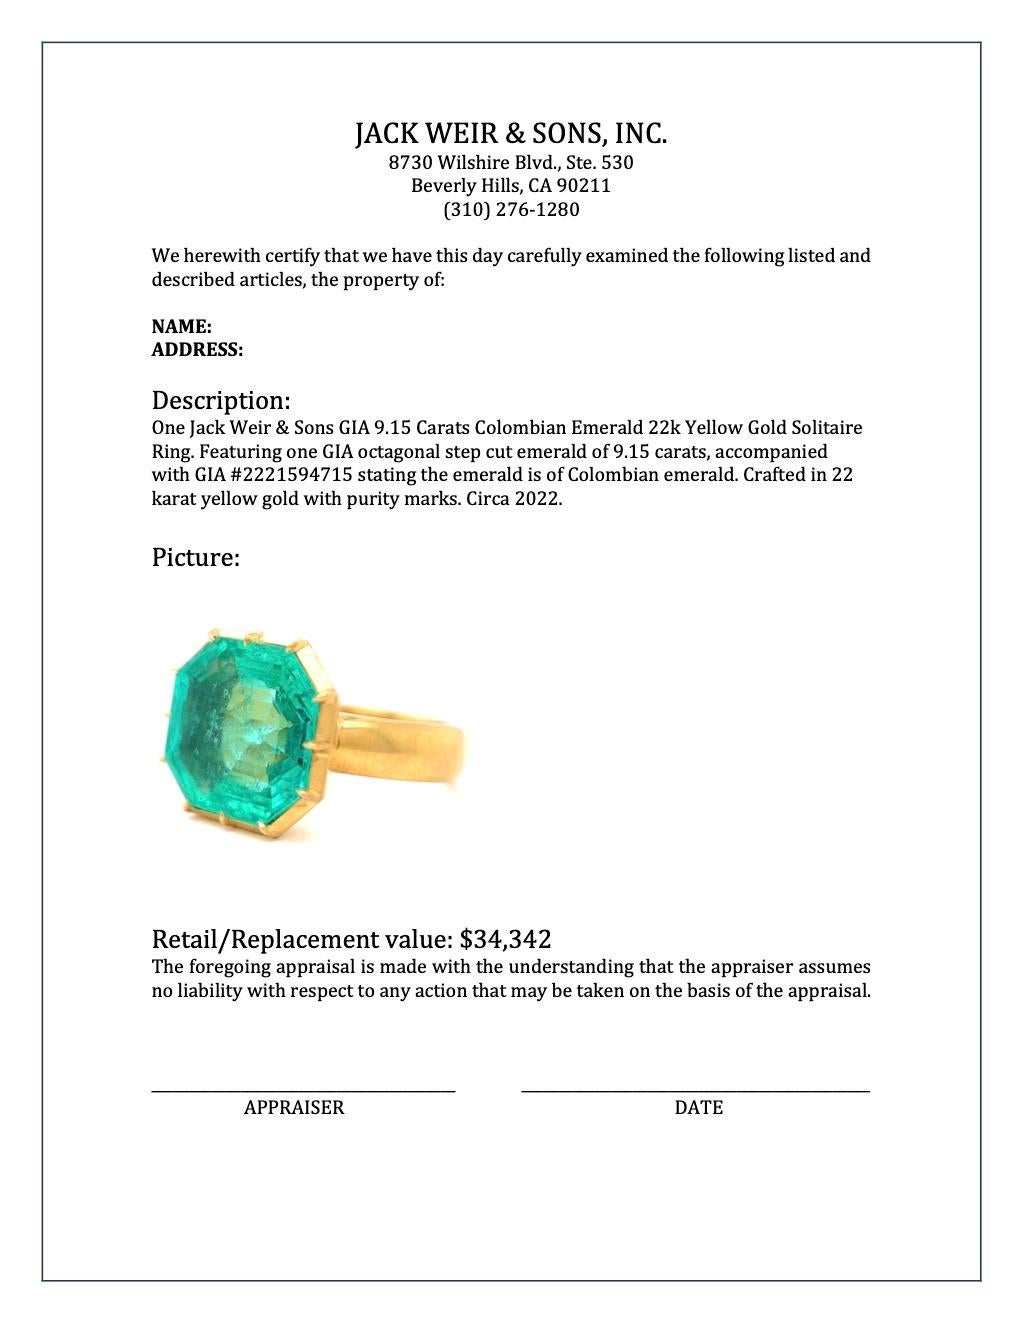 Women's or Men's Jack Weir & Sons GIA 9.15 Carat Colombian Emerald 22k Yellow Gold Solitaire Ring